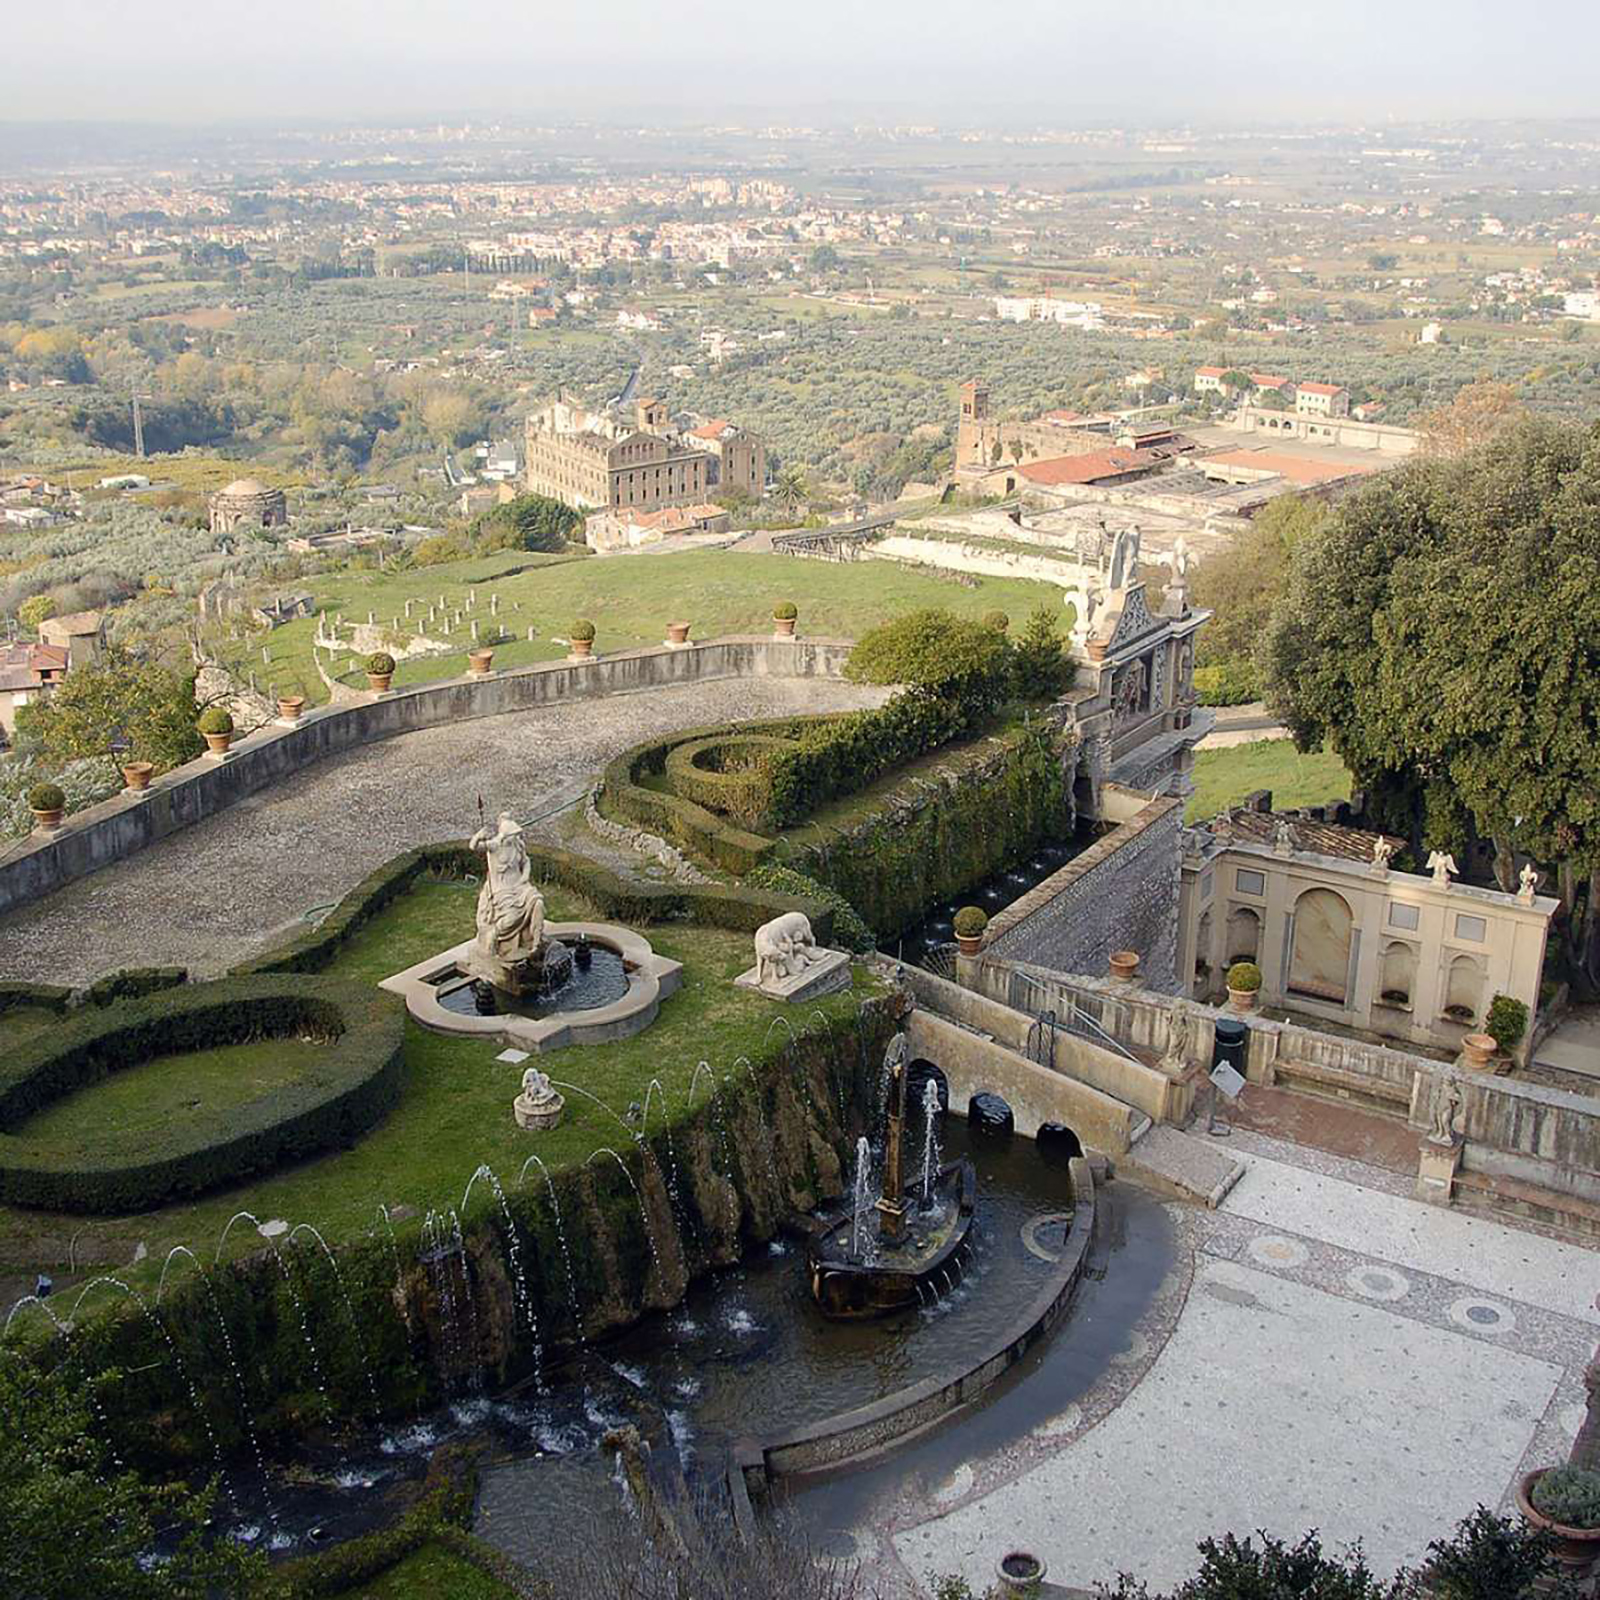 An aerial photograph of an Italian garden, with sculptured paths and lawns and a water fountain.